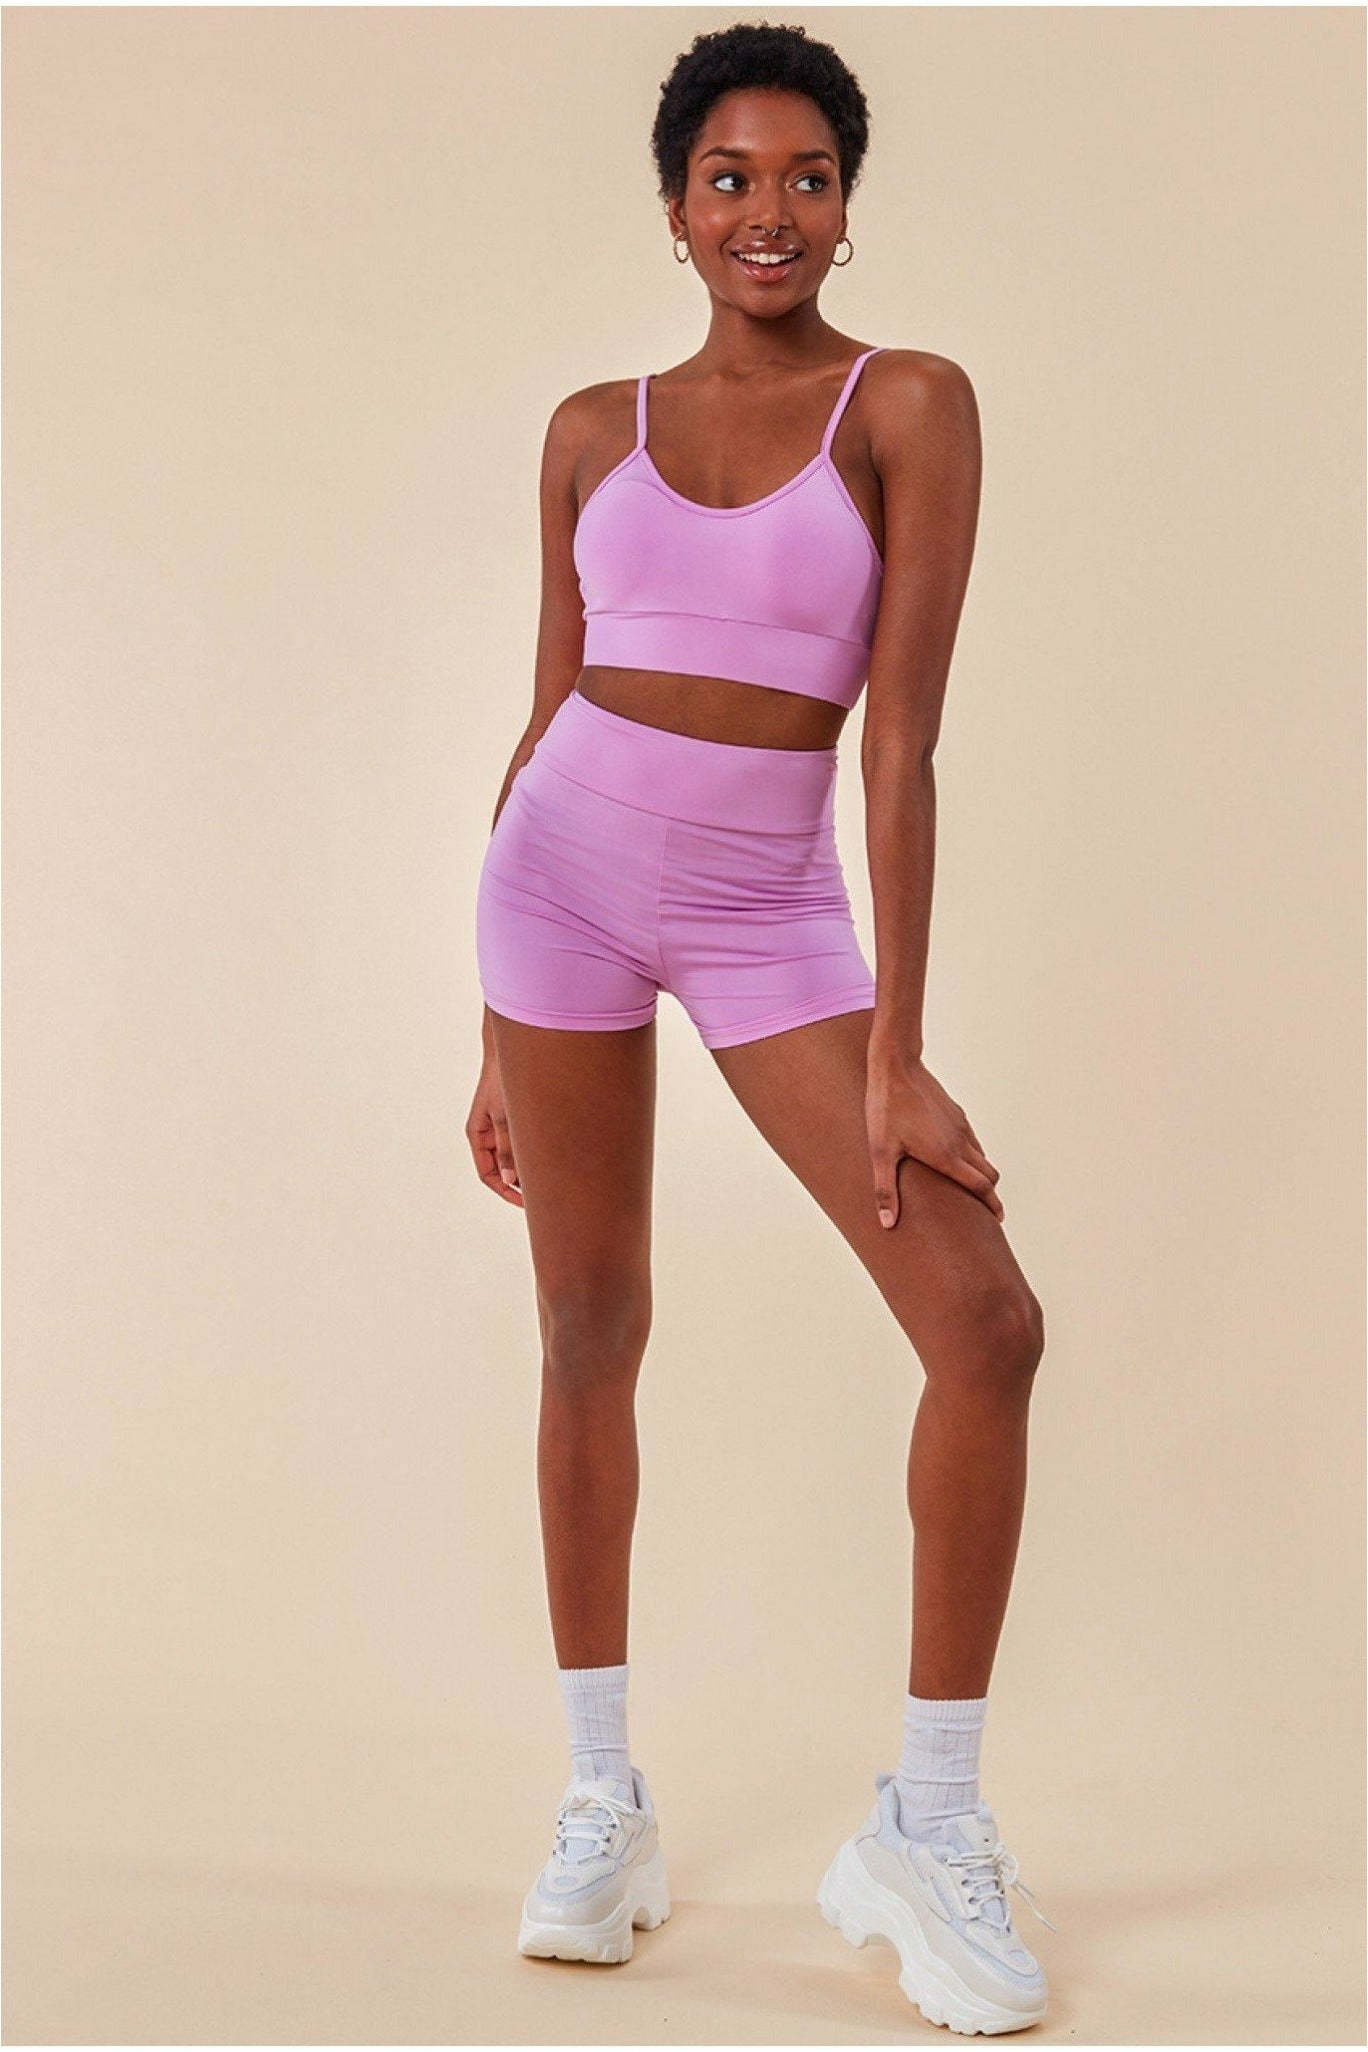 Cosmochic Cropped Bralette & Cycle Short Set - Purple